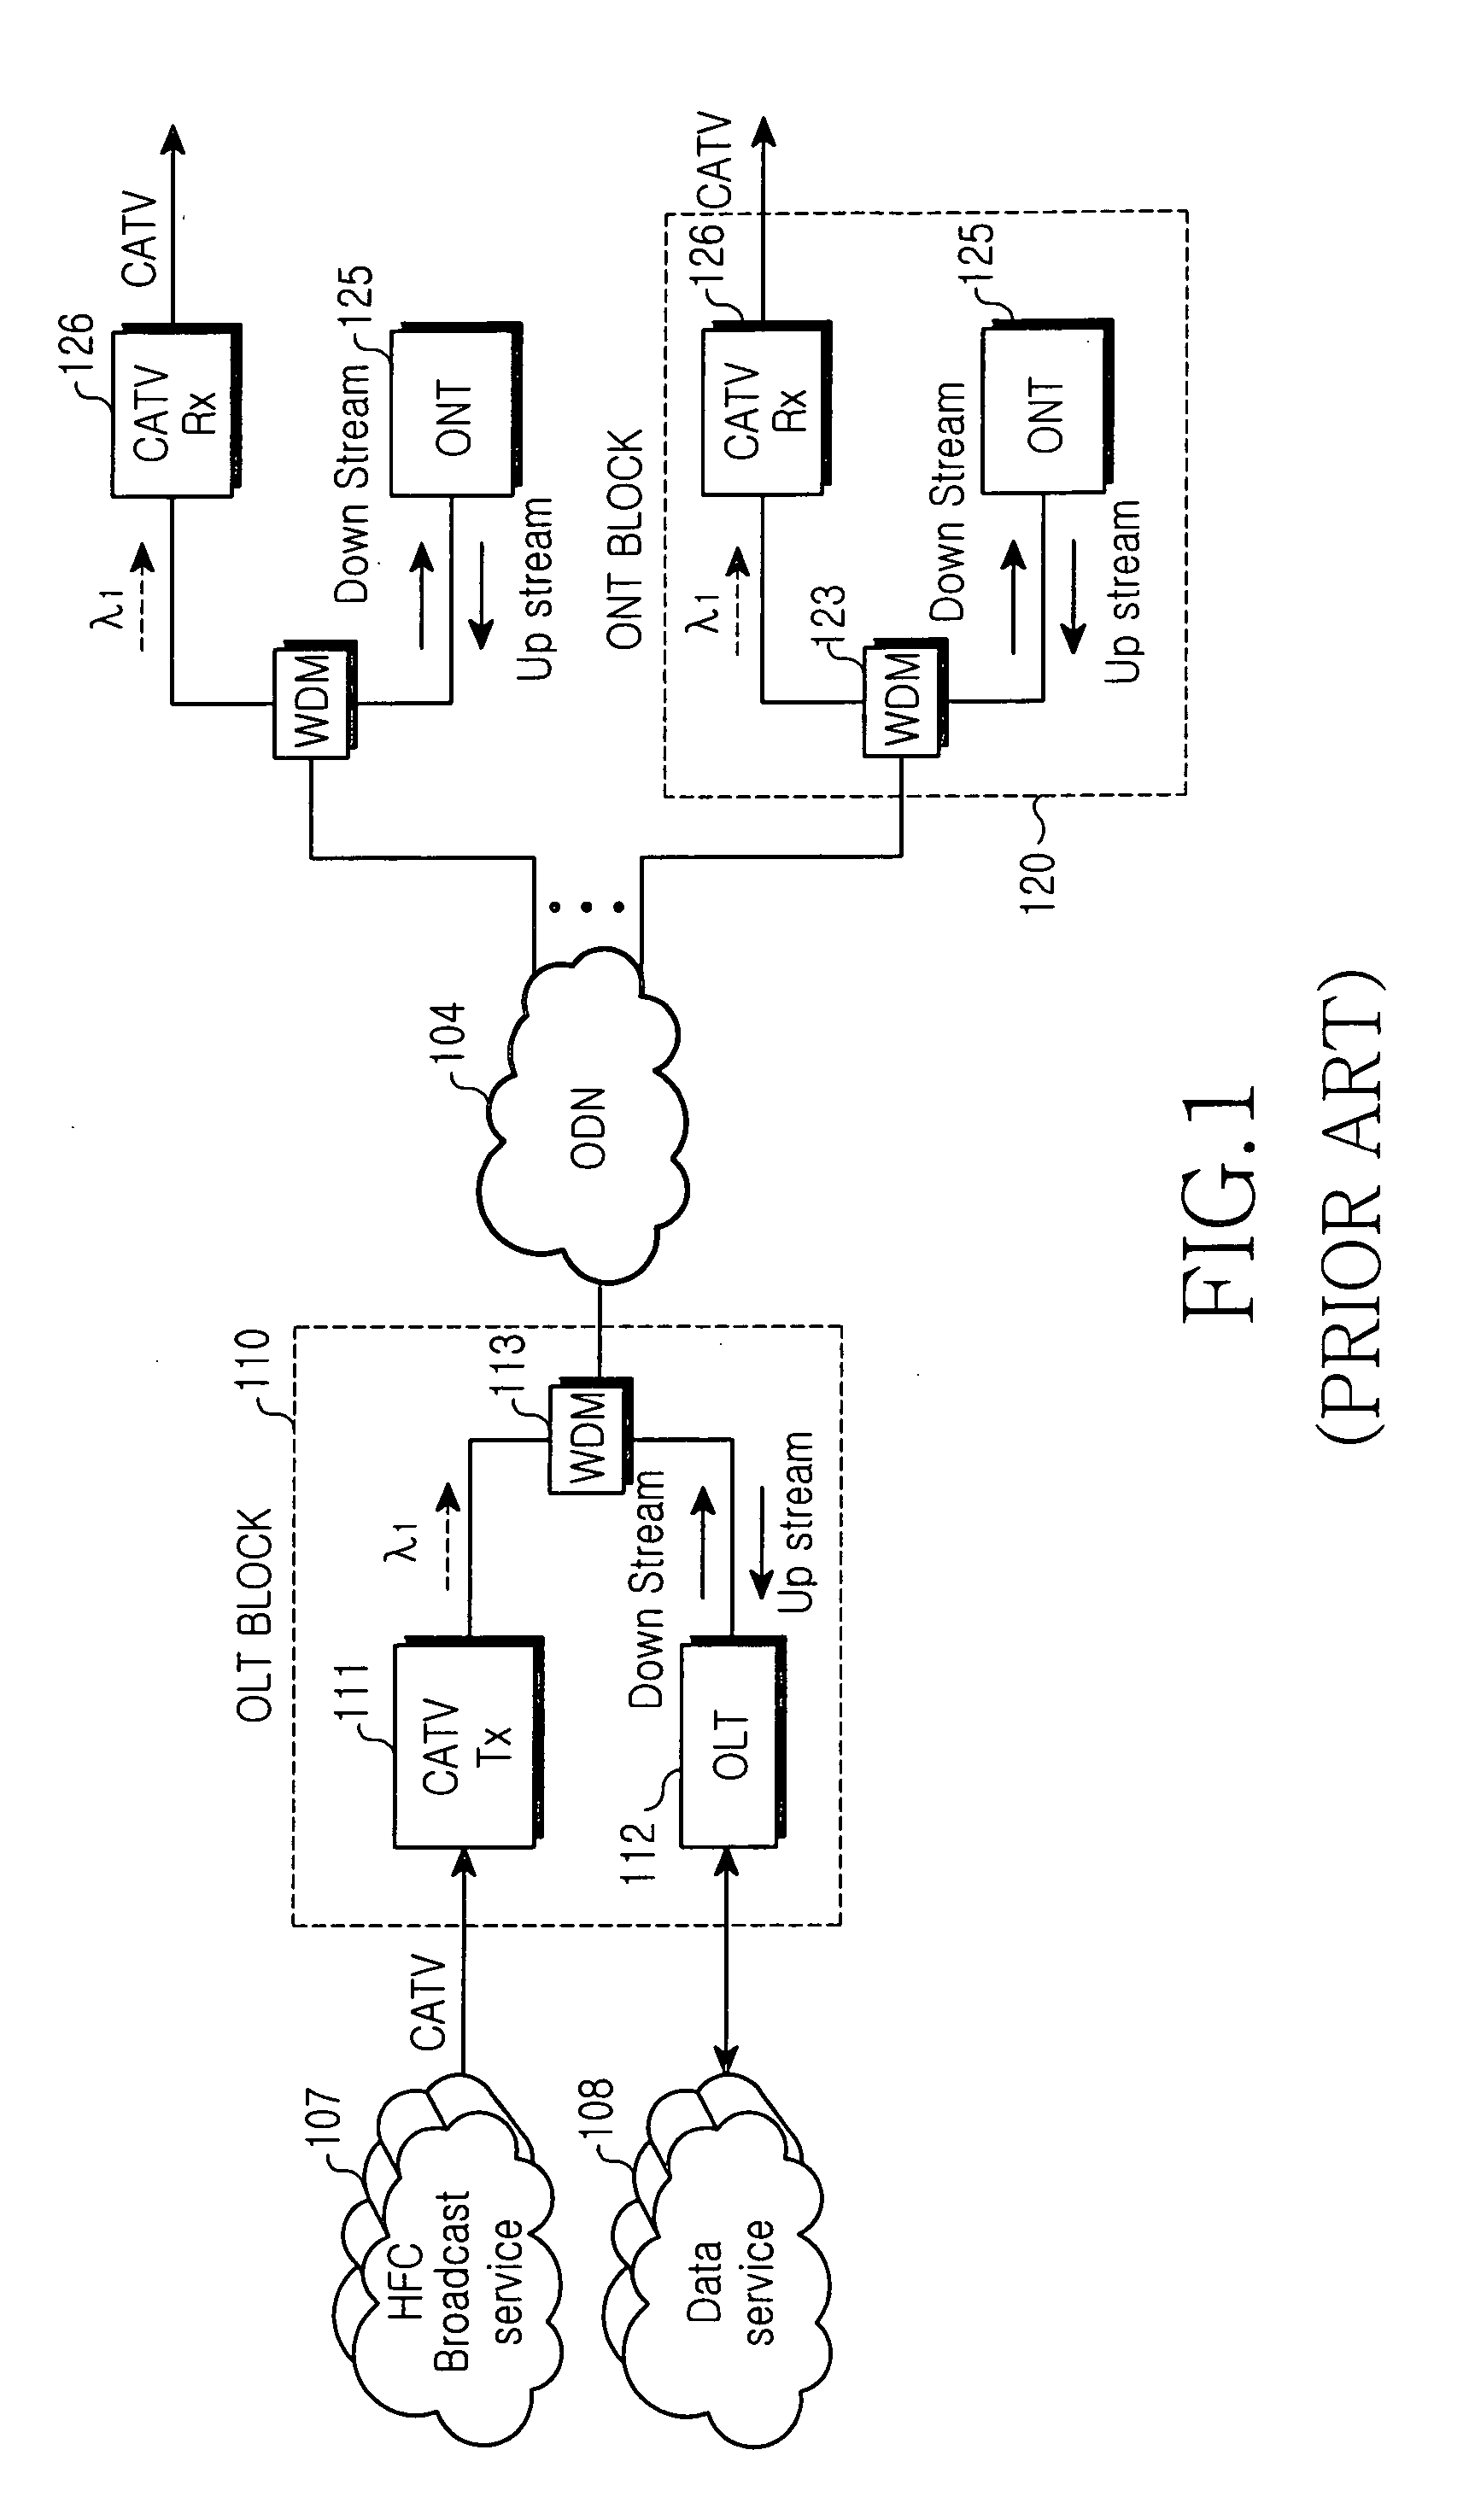 FTTH system based on passive optical network for broadcasting service